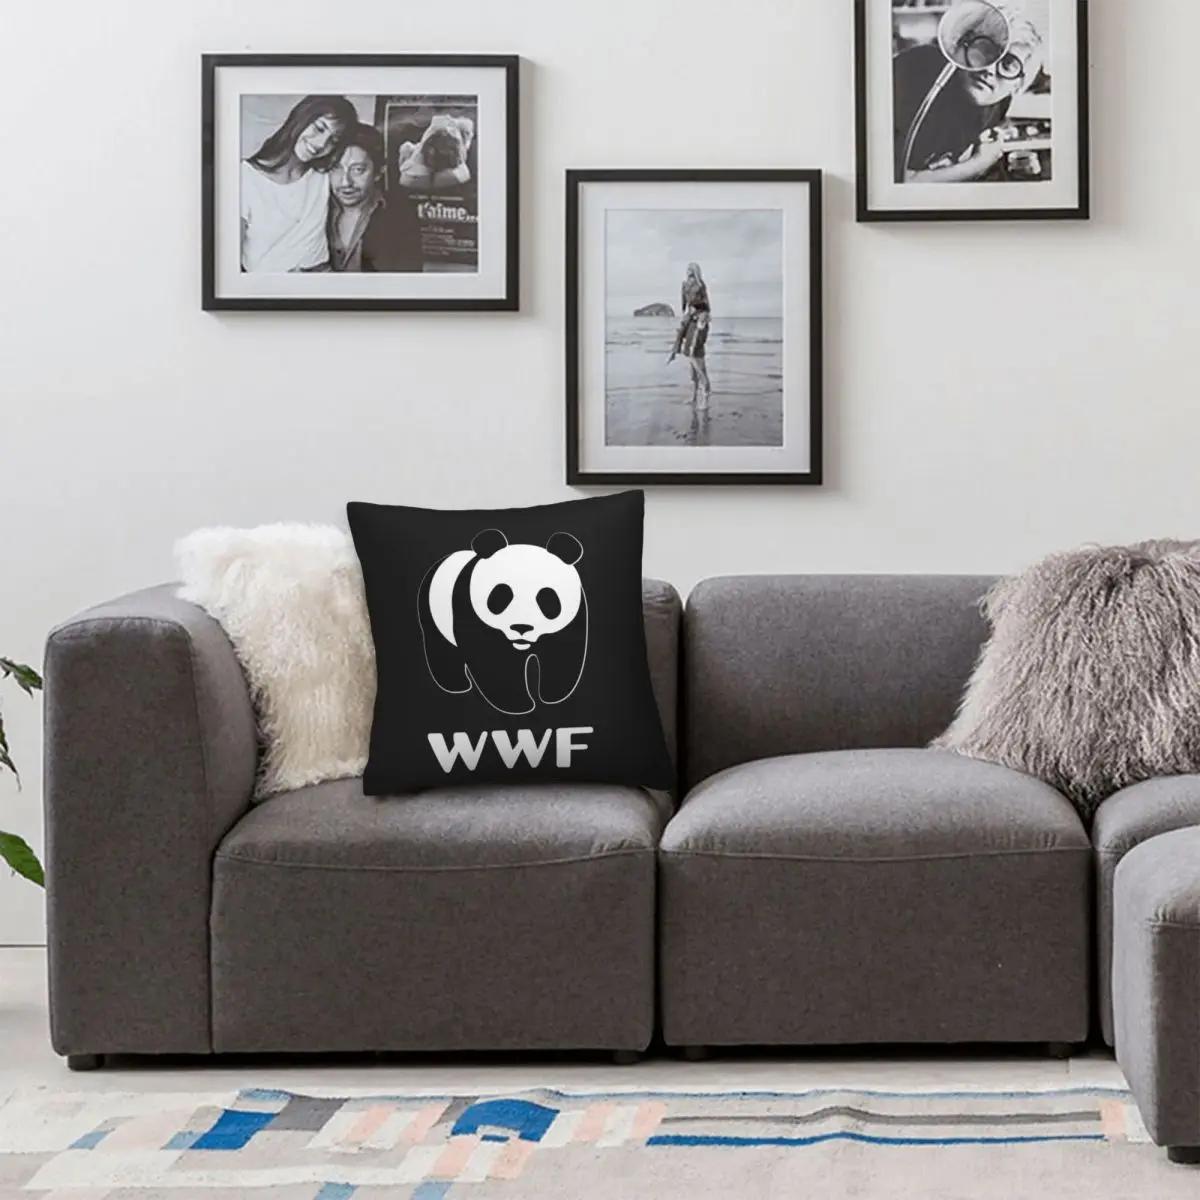 World Wildlife Fund 2 Square Pillowcase Polyester Linen Velvet Printed Zip Decor Bed Cushion Cover images - 6